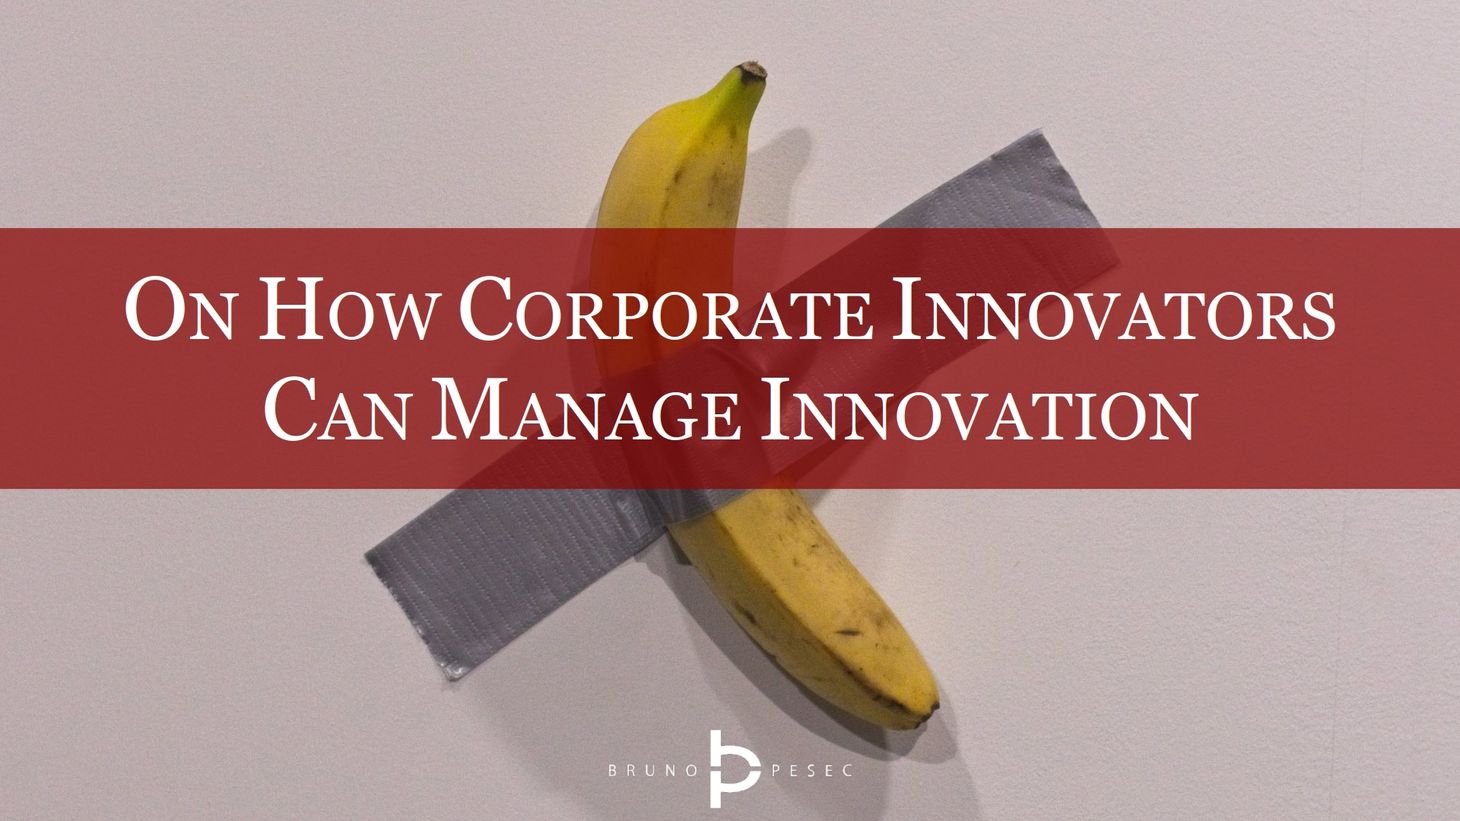 On how corporate innovators can manage innovation